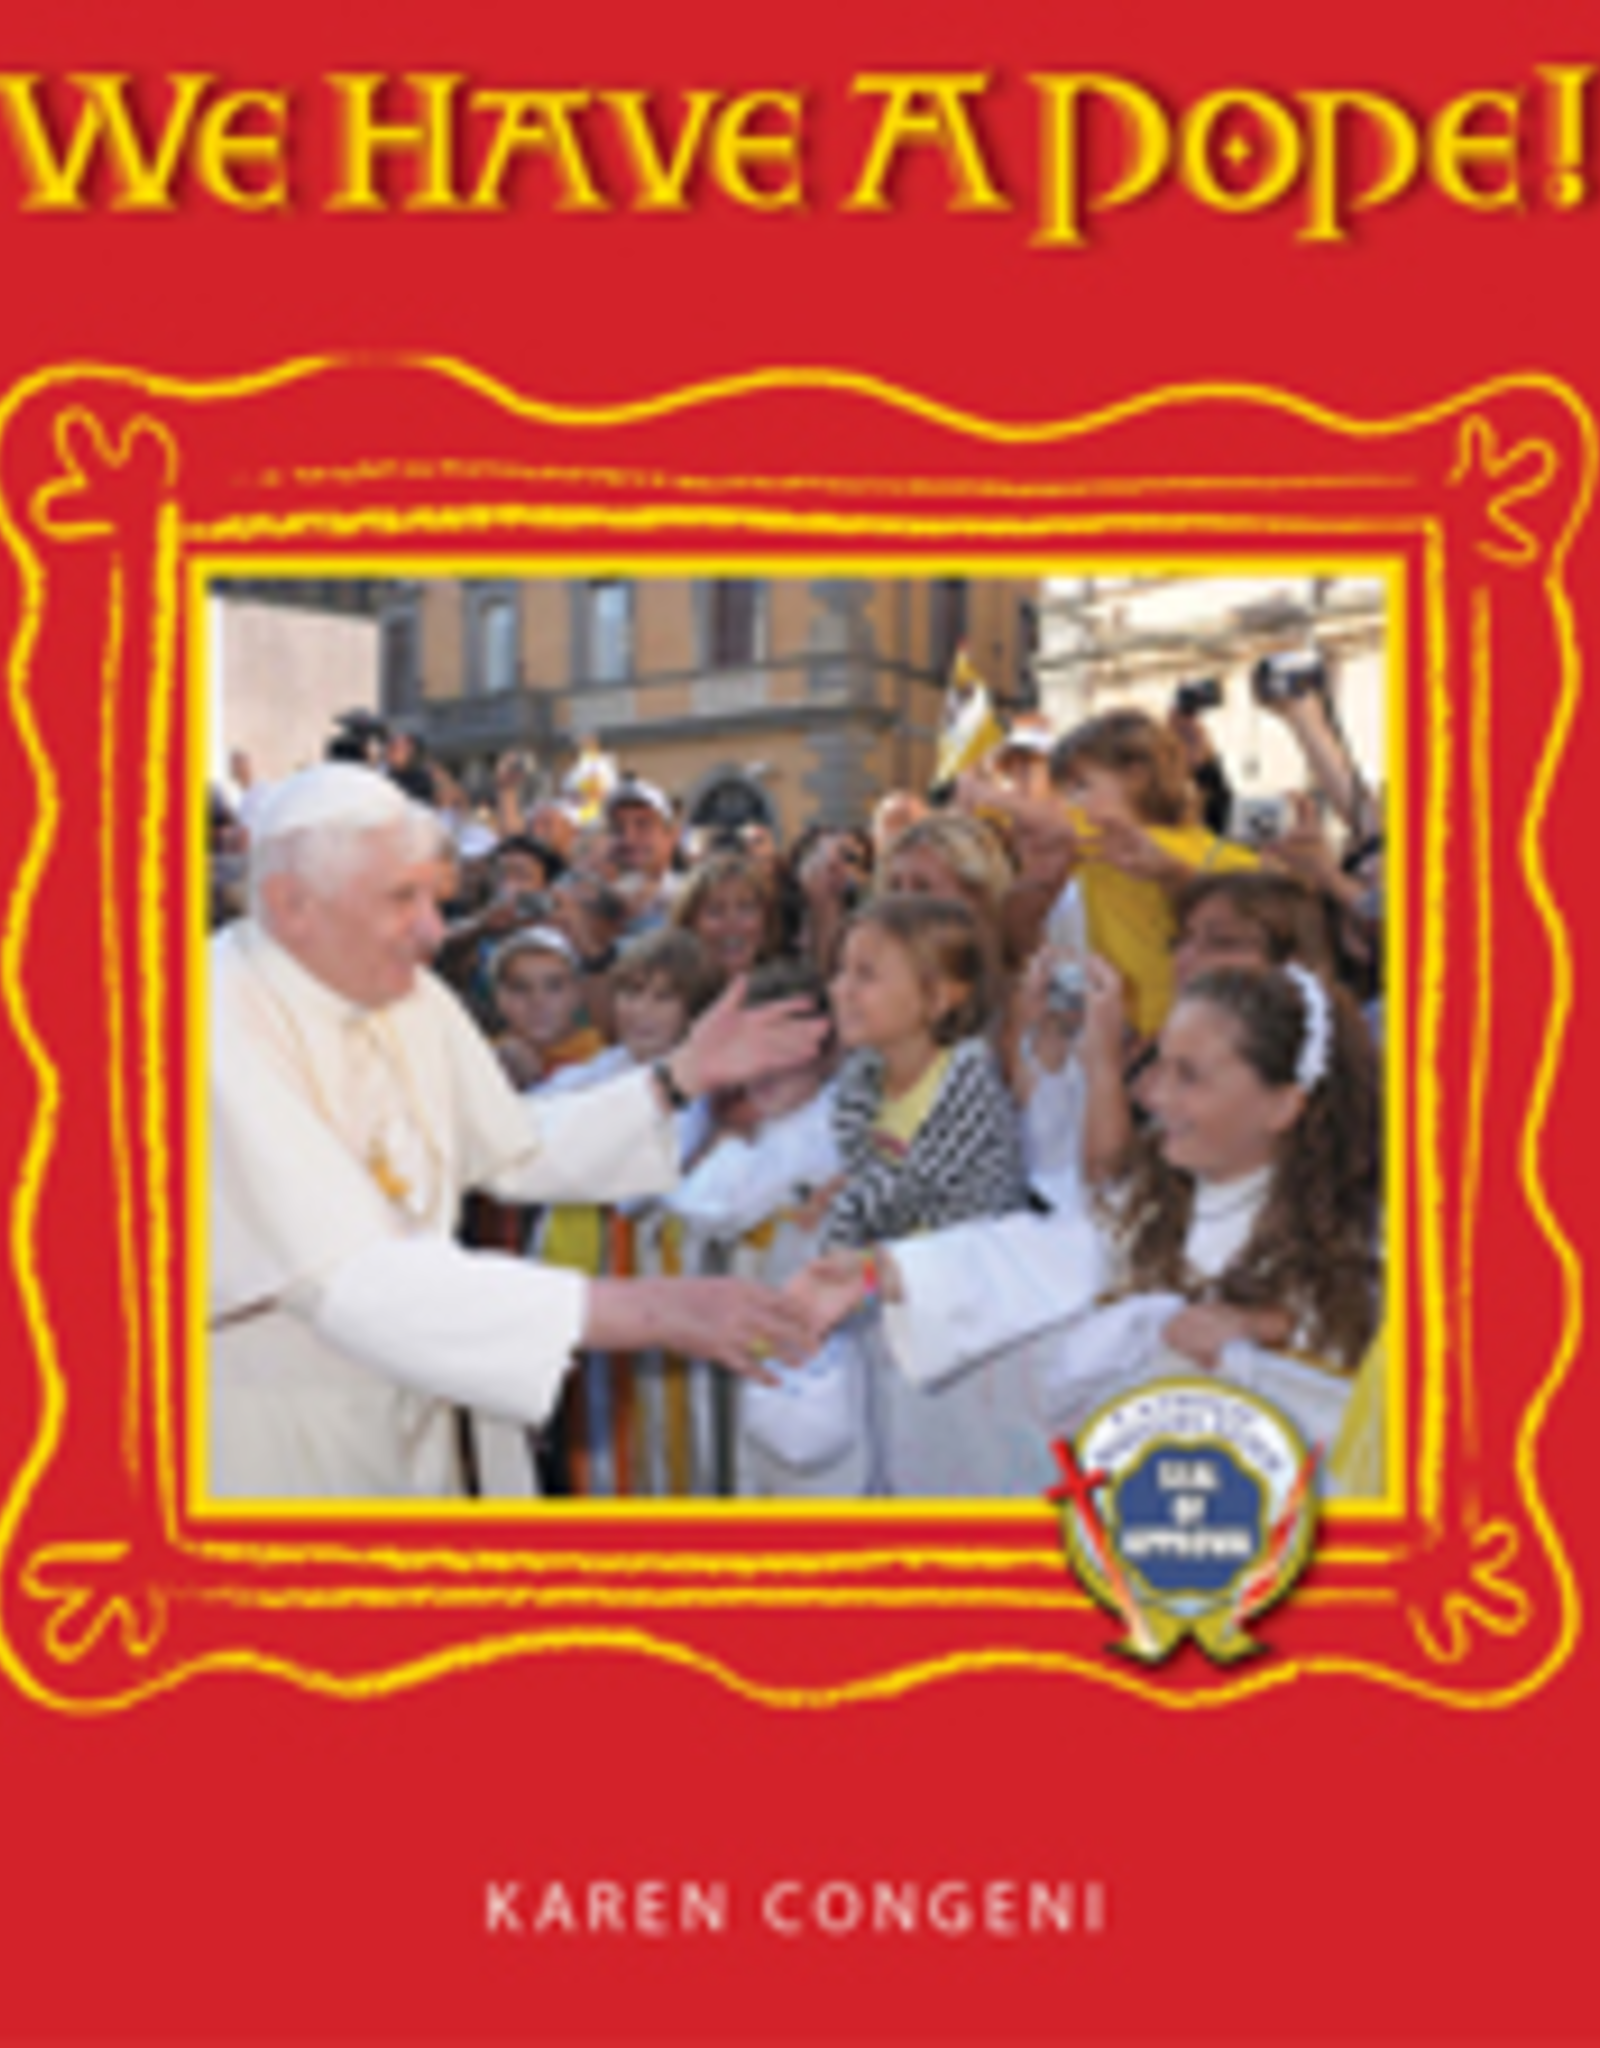 Catholic Word Publisher Group We Have a Pope-- Children's Book, by Karen Congeni (hardcover)